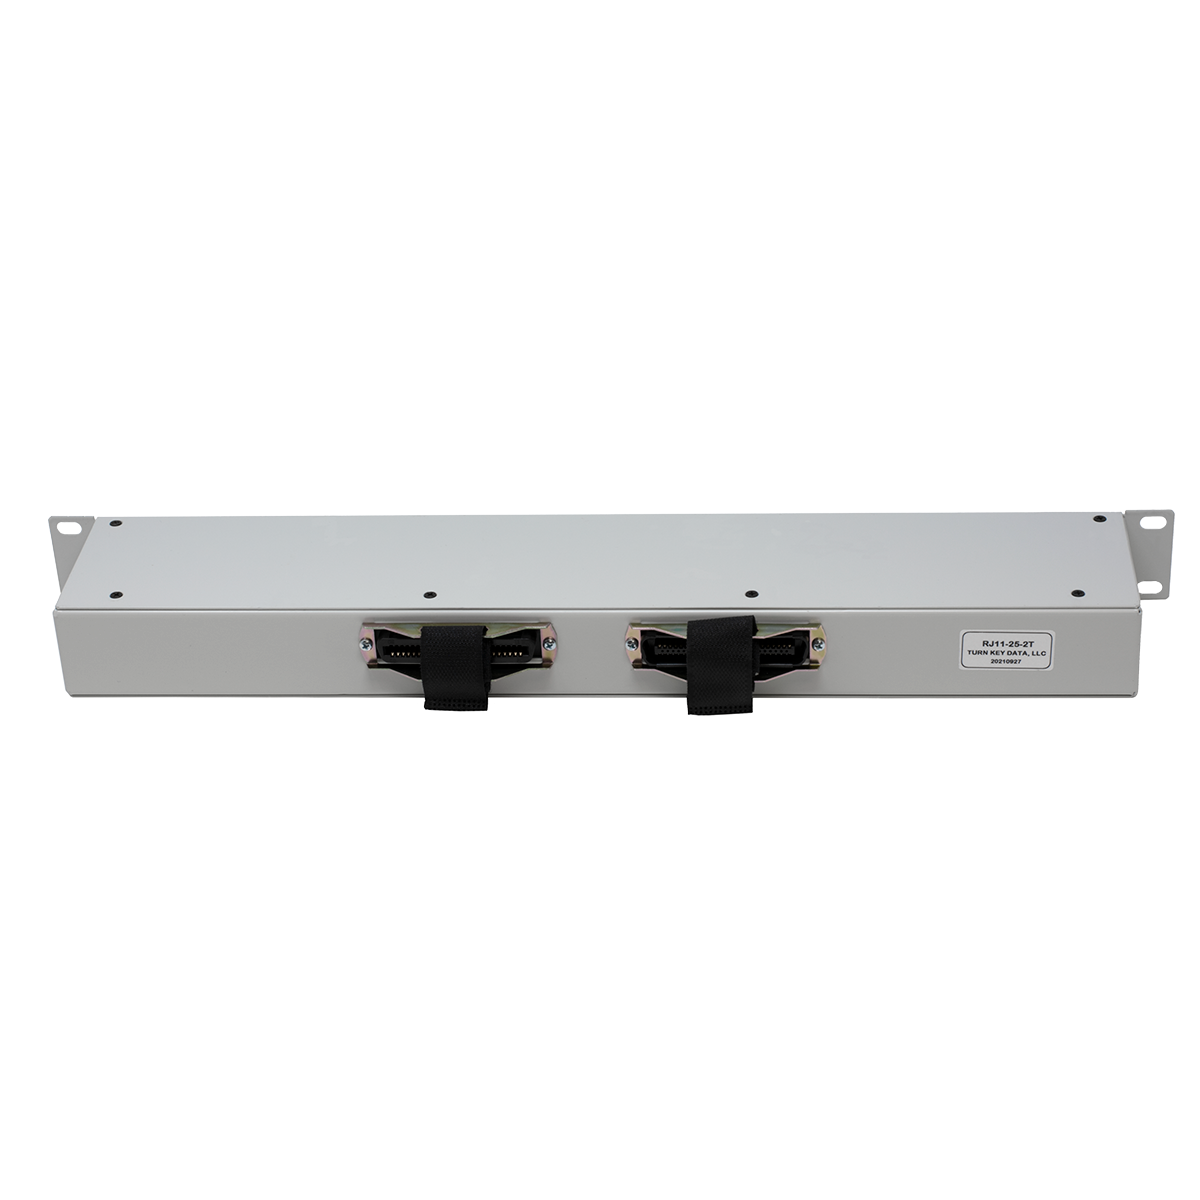  25 Port 1 Pair RJ-11 Patch Panel with Male and Female Amp (Back View)